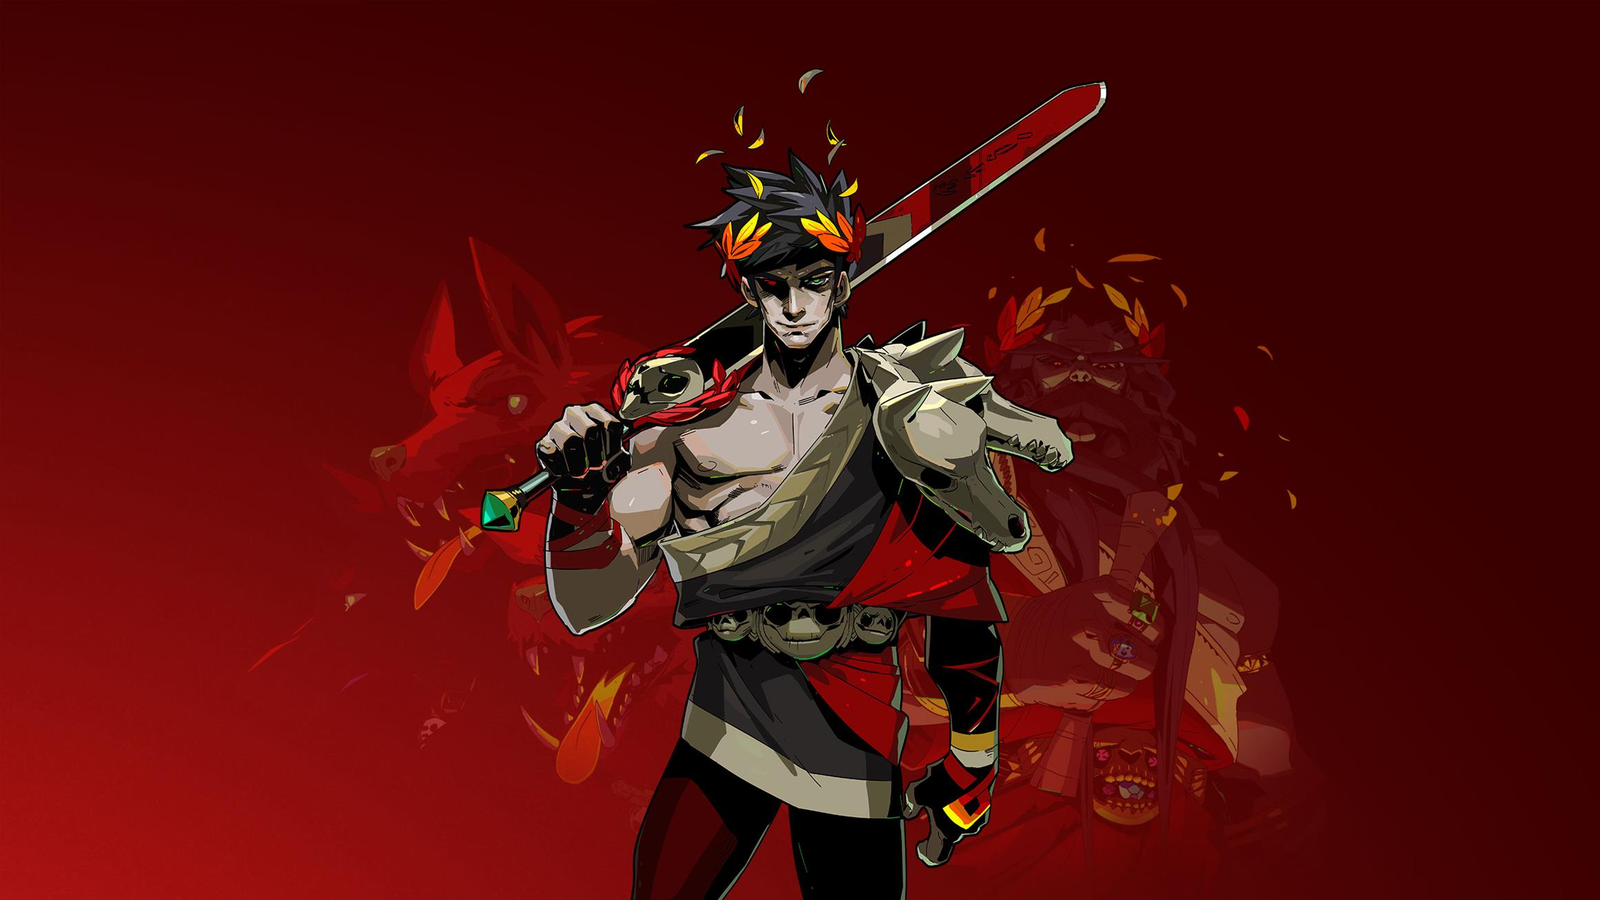 Hades 2 Has A Brand New Main Character, protagonist, And they have a  close connection to Zagreus and Hades!, By GGRecon